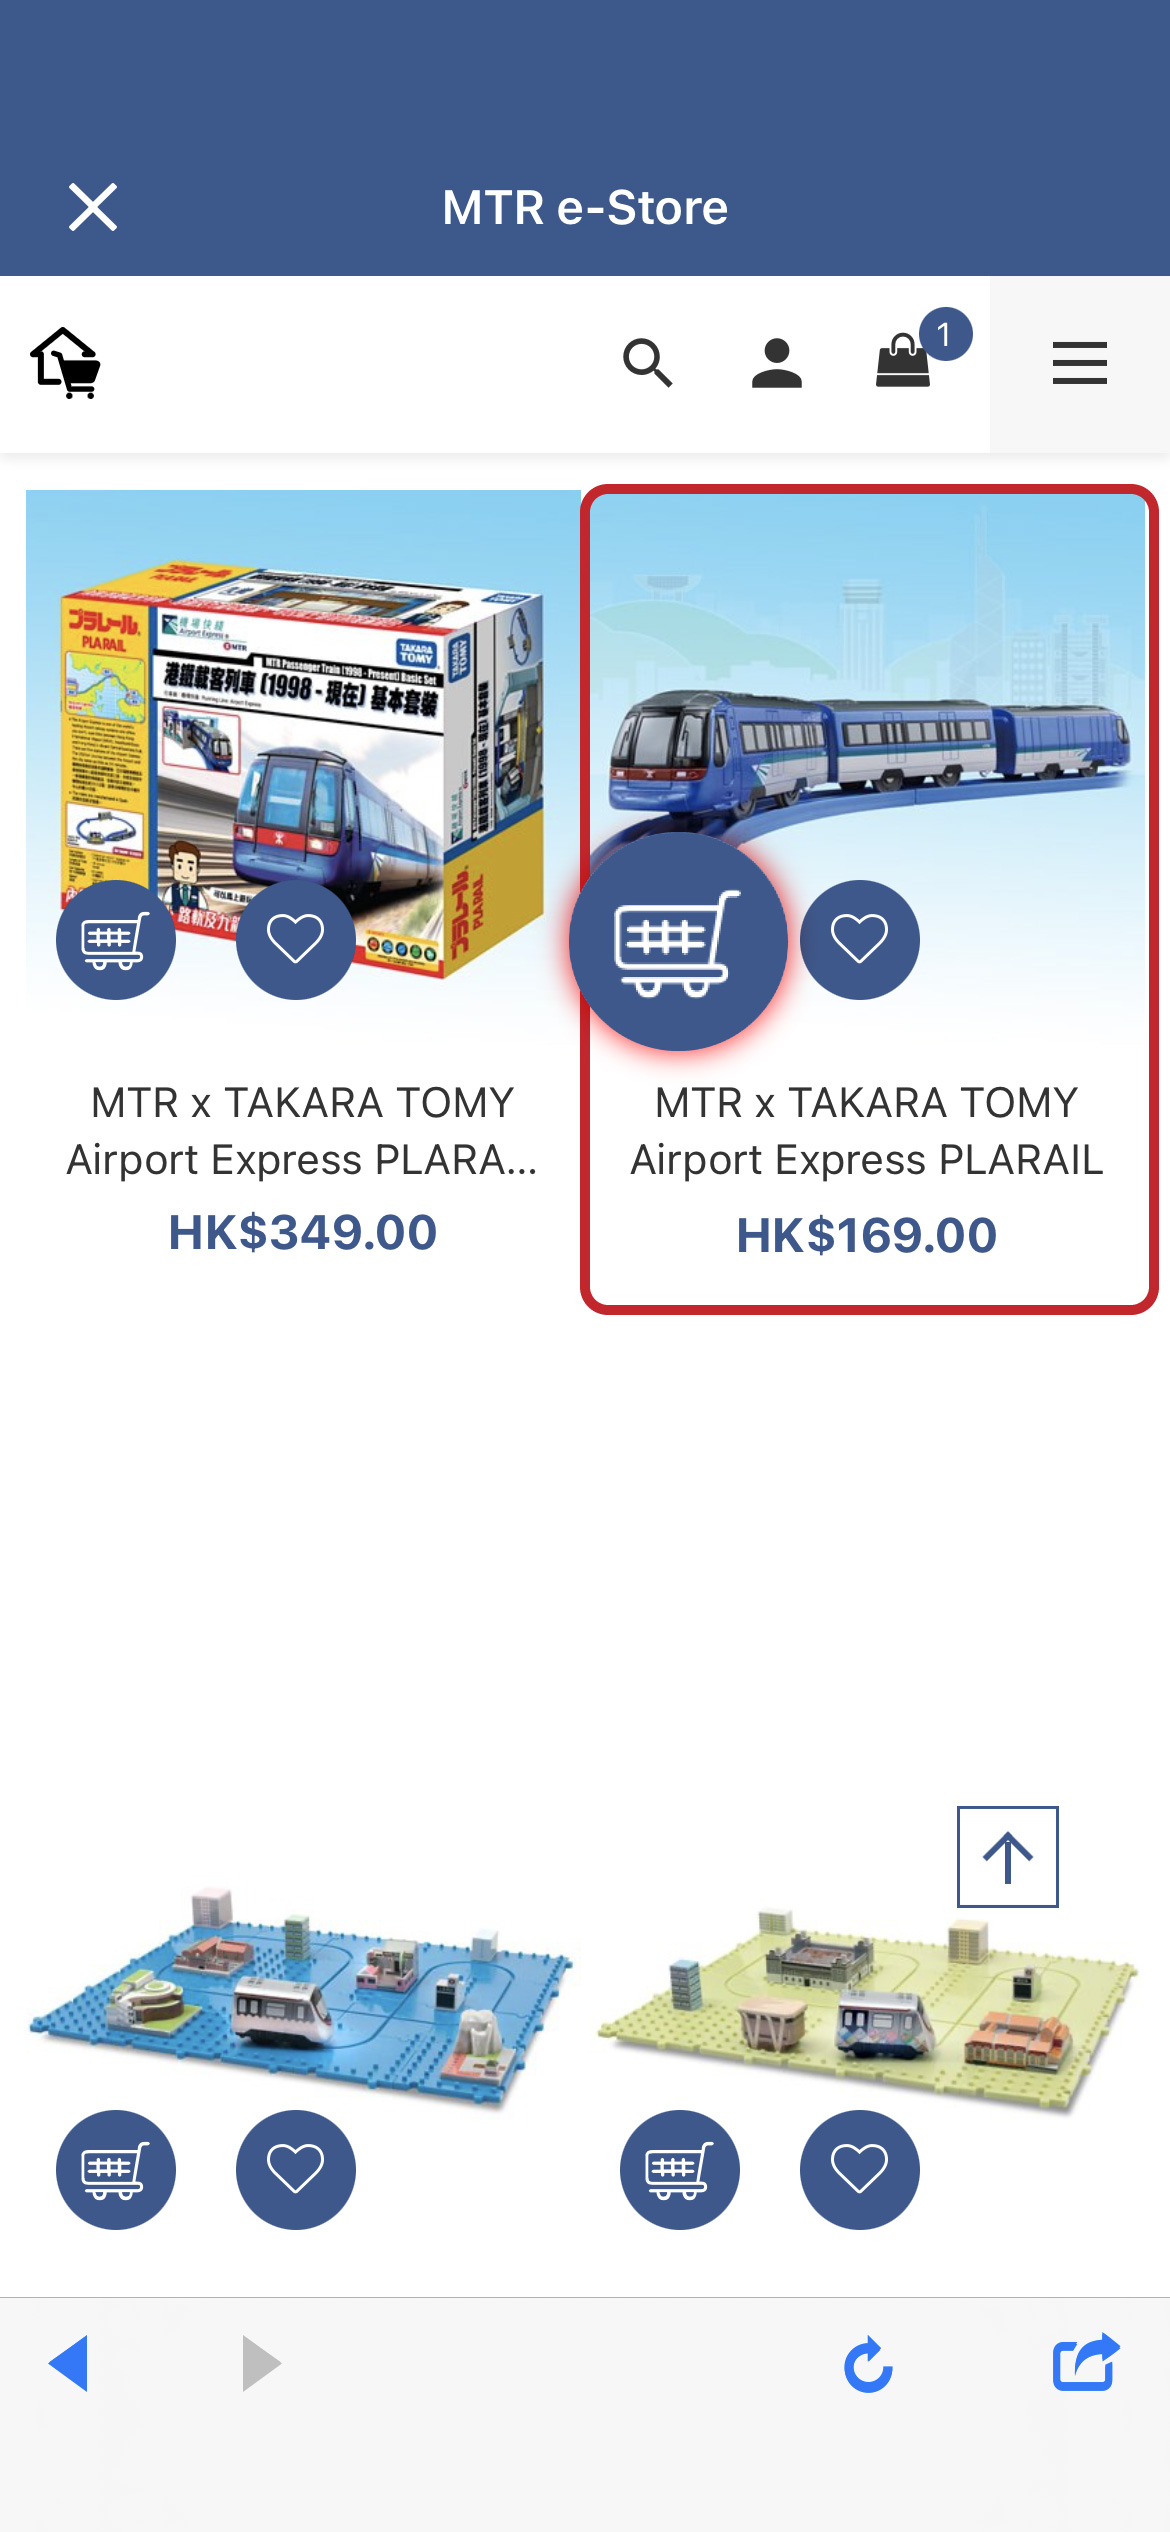 Pick your favourite product(s) at MTR e-Store